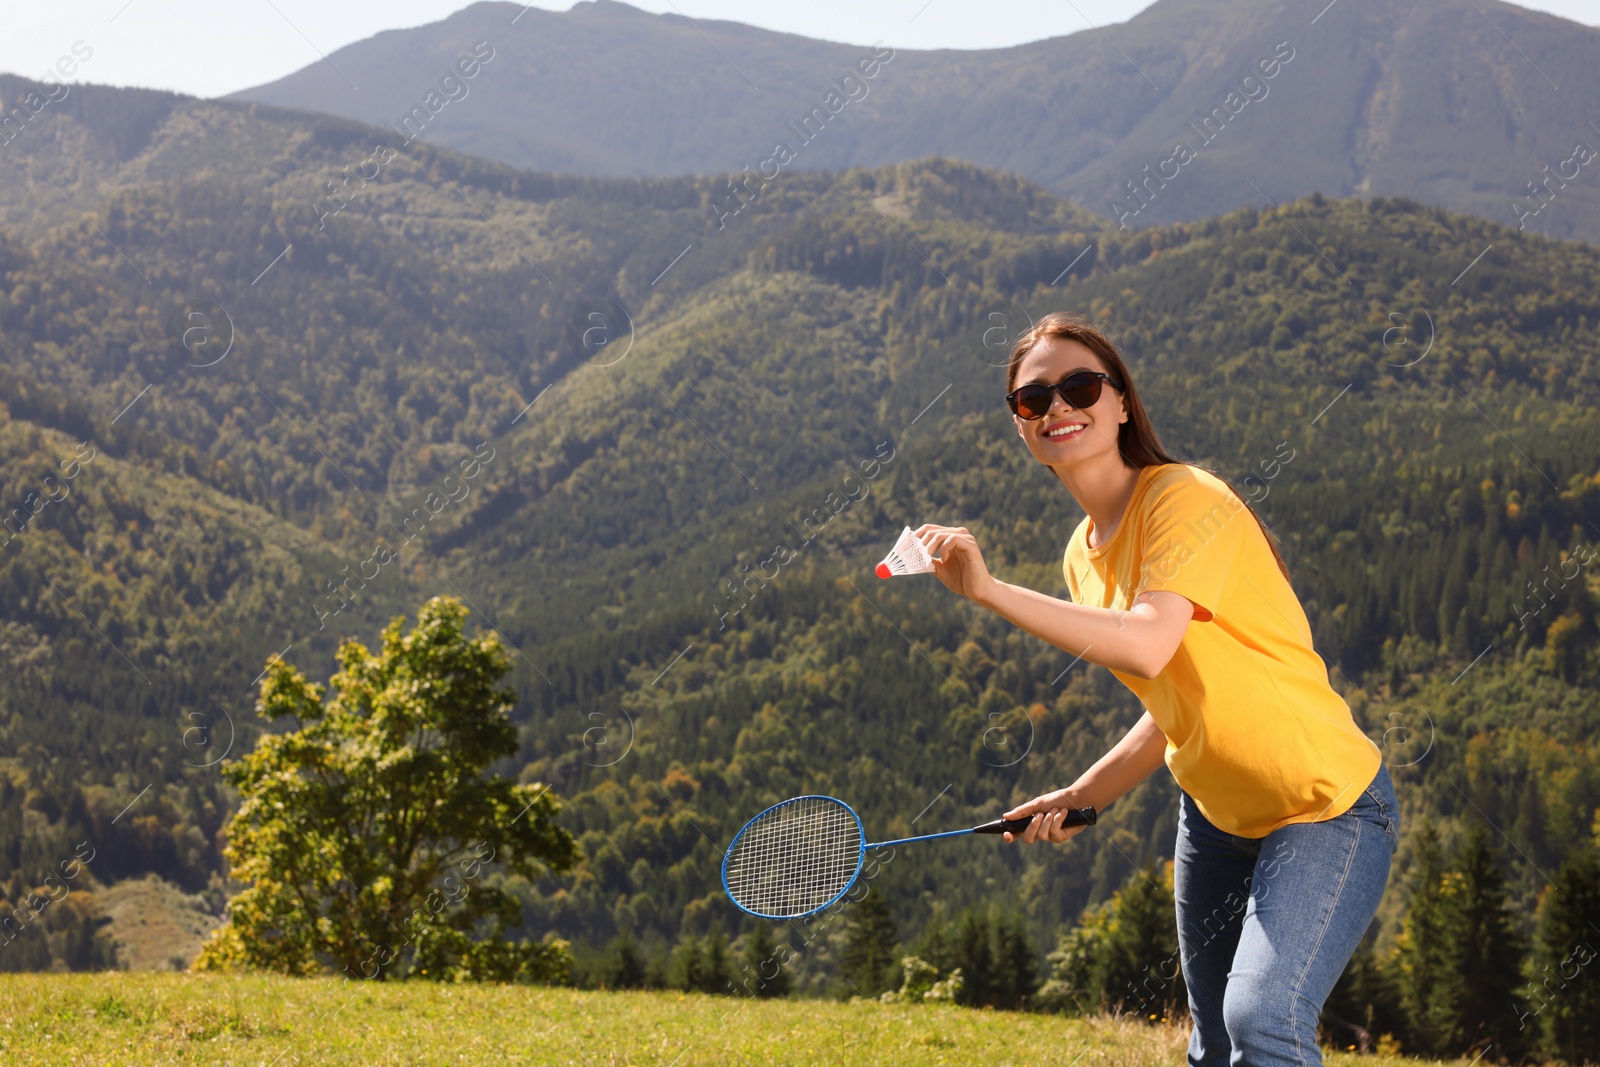 Photo of Woman playing badminton in mountains on sunny day. Space for text